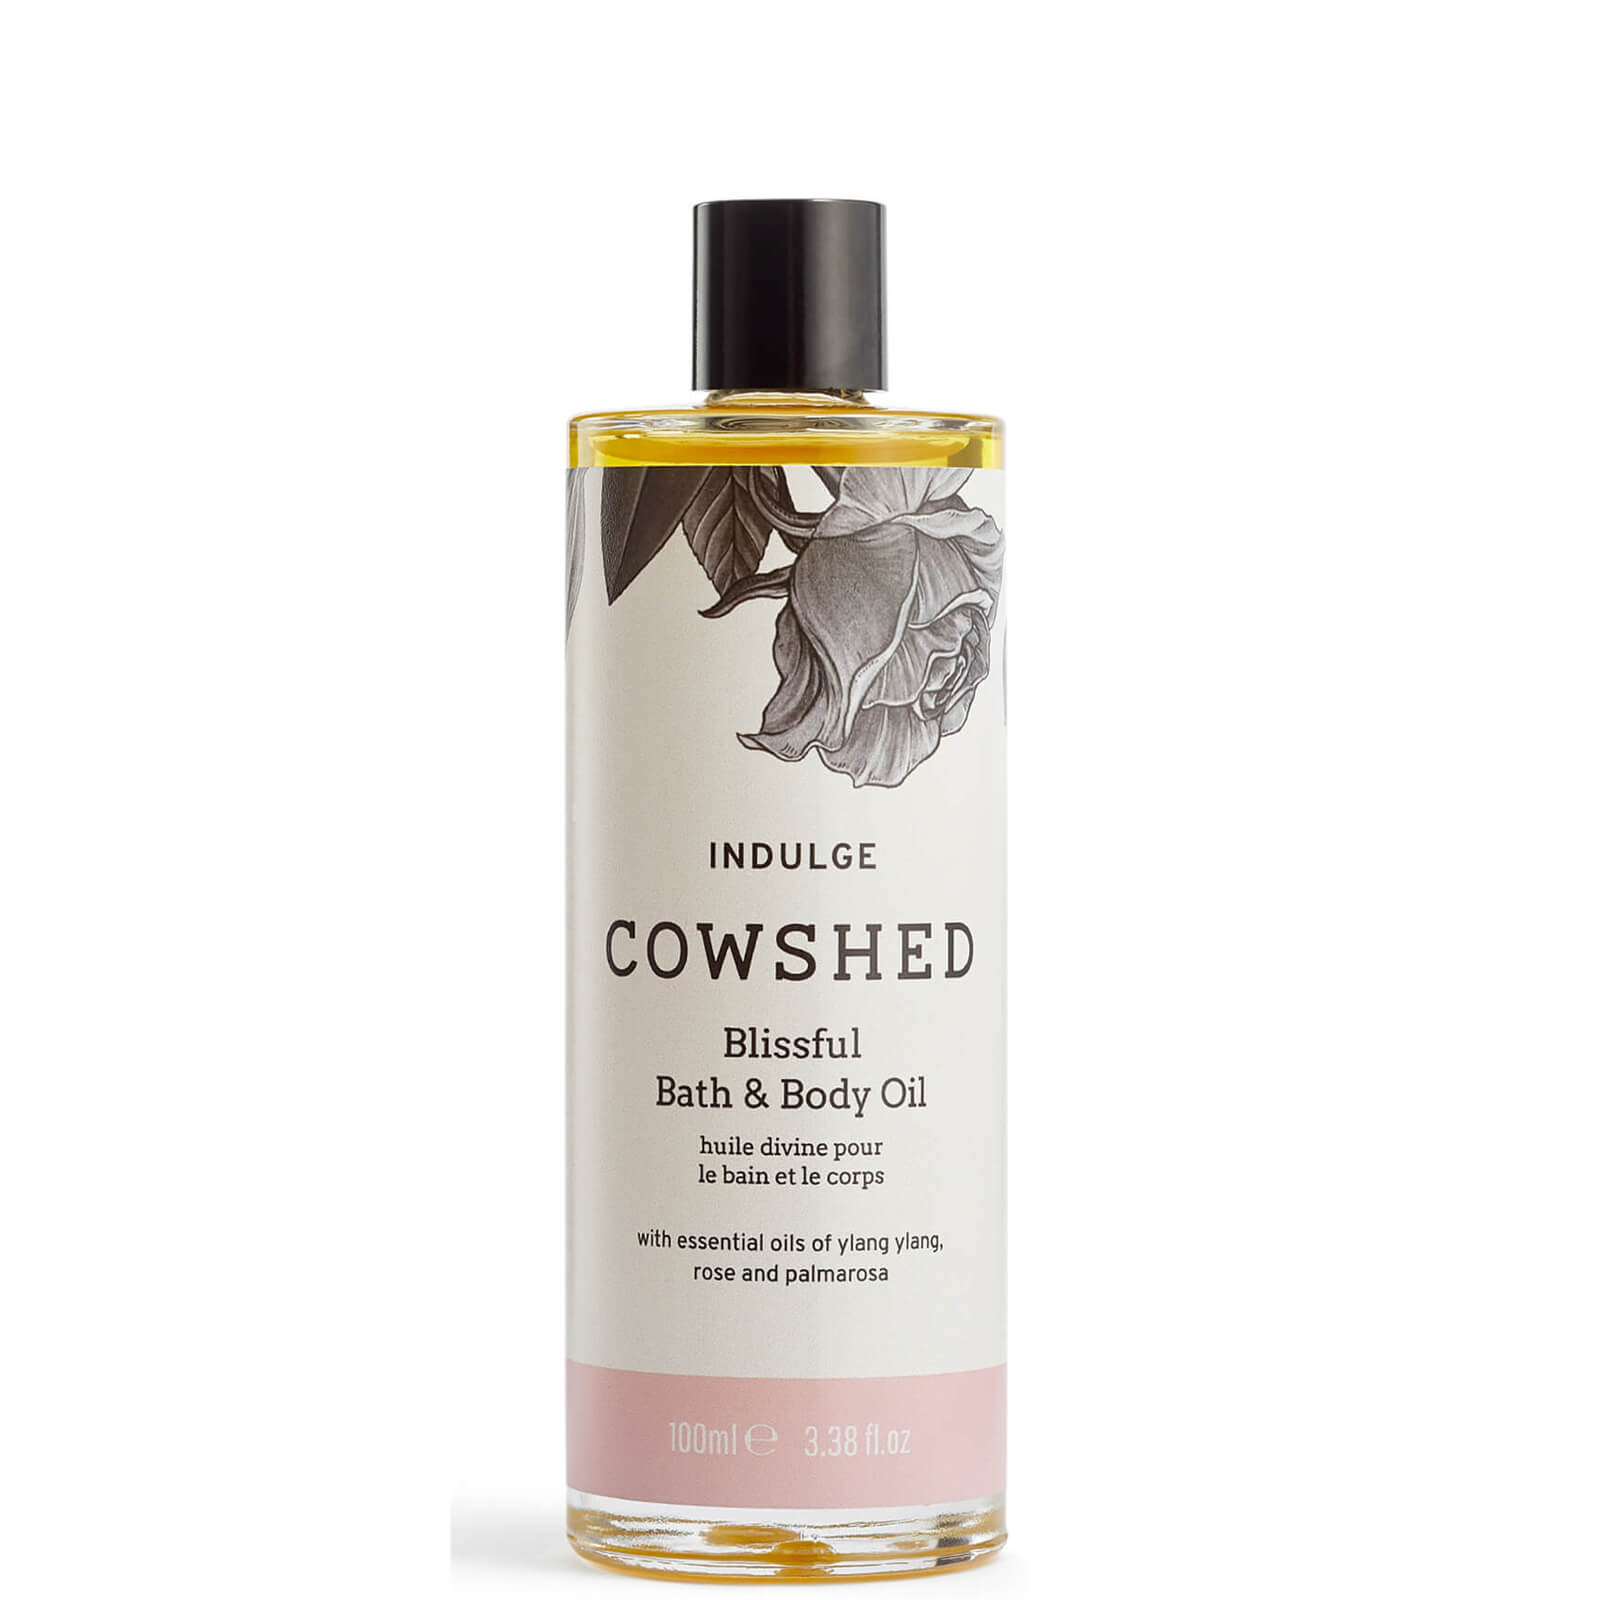 Image of Cowshed INDULGE Blissful Bath & Body Oil 100ml